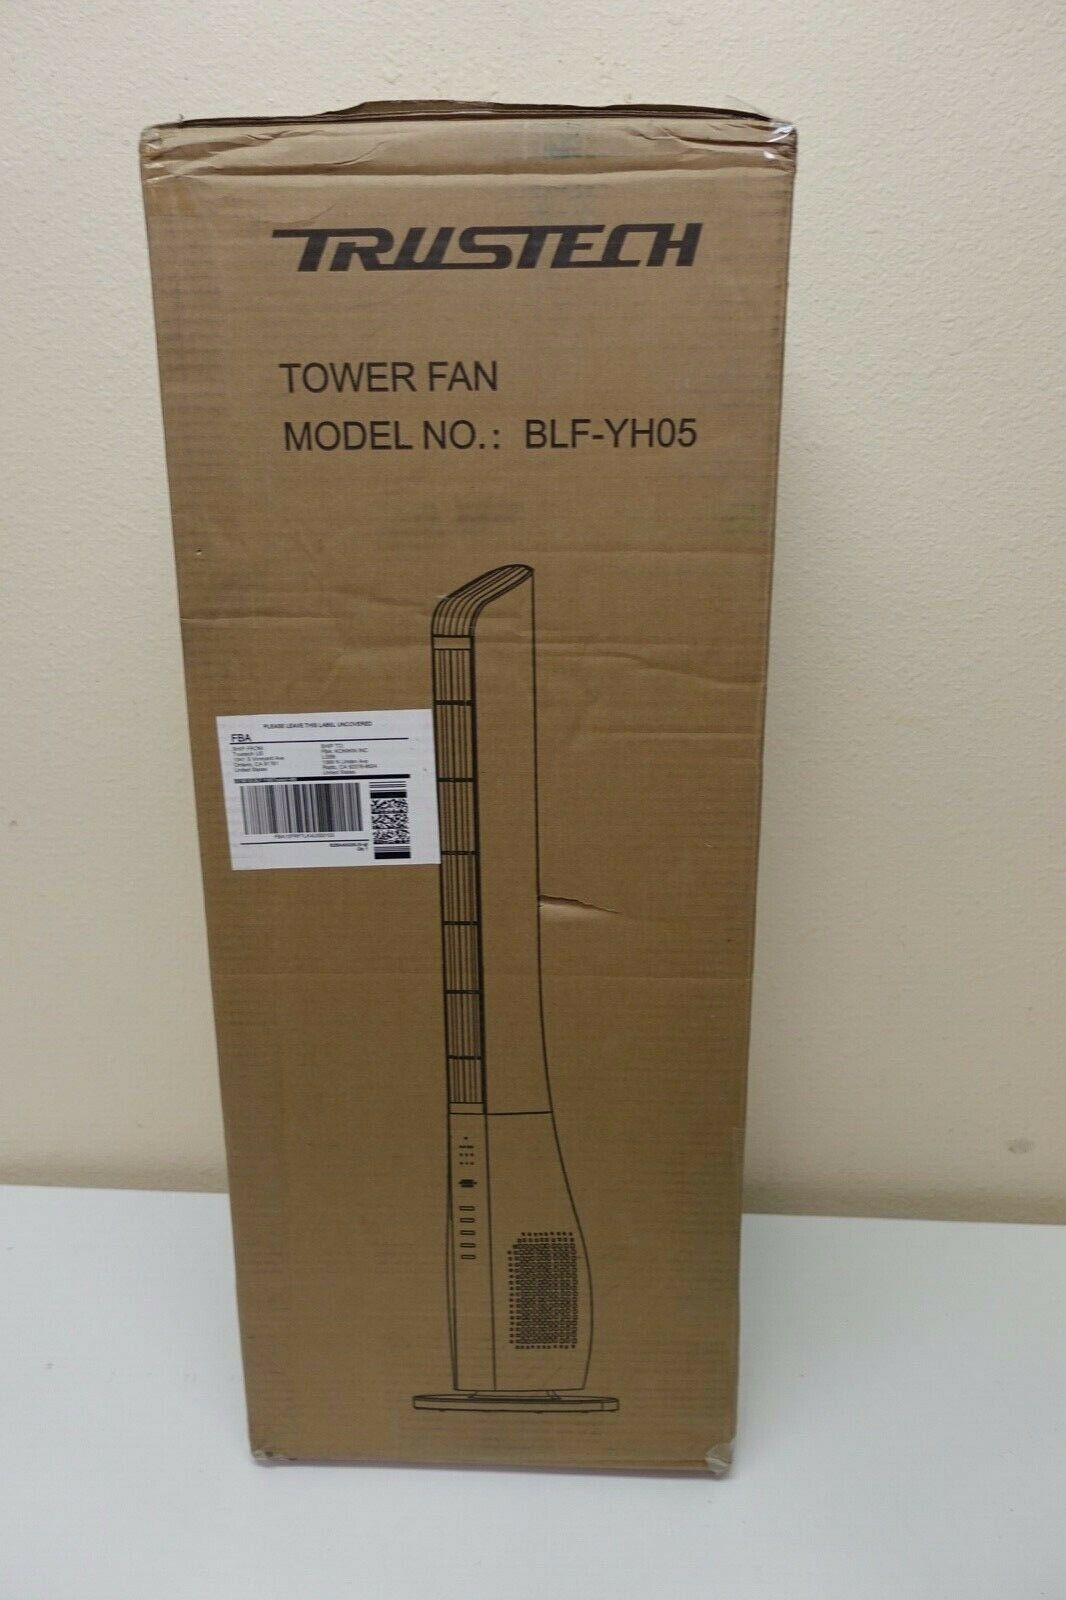 Trustech Low Noise Oscillating Tower Fan W Remote Control White Blf Yh05 5b intended for size 1066 X 1600